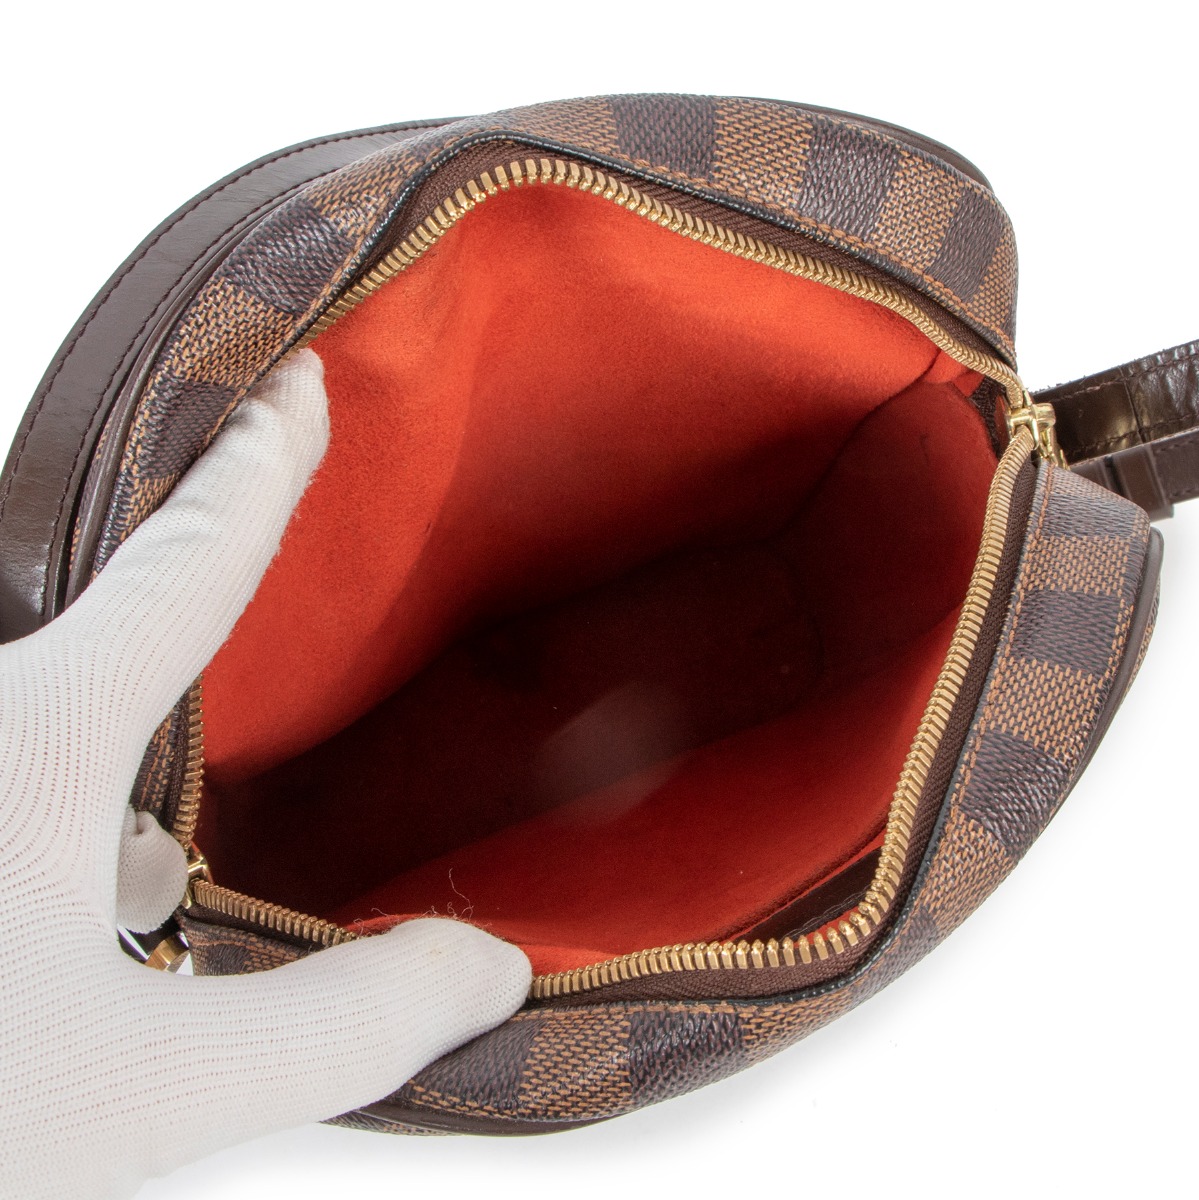 Pre-Owned Louis Vuitton Ipanema PM Bag- 2235RY2 1 